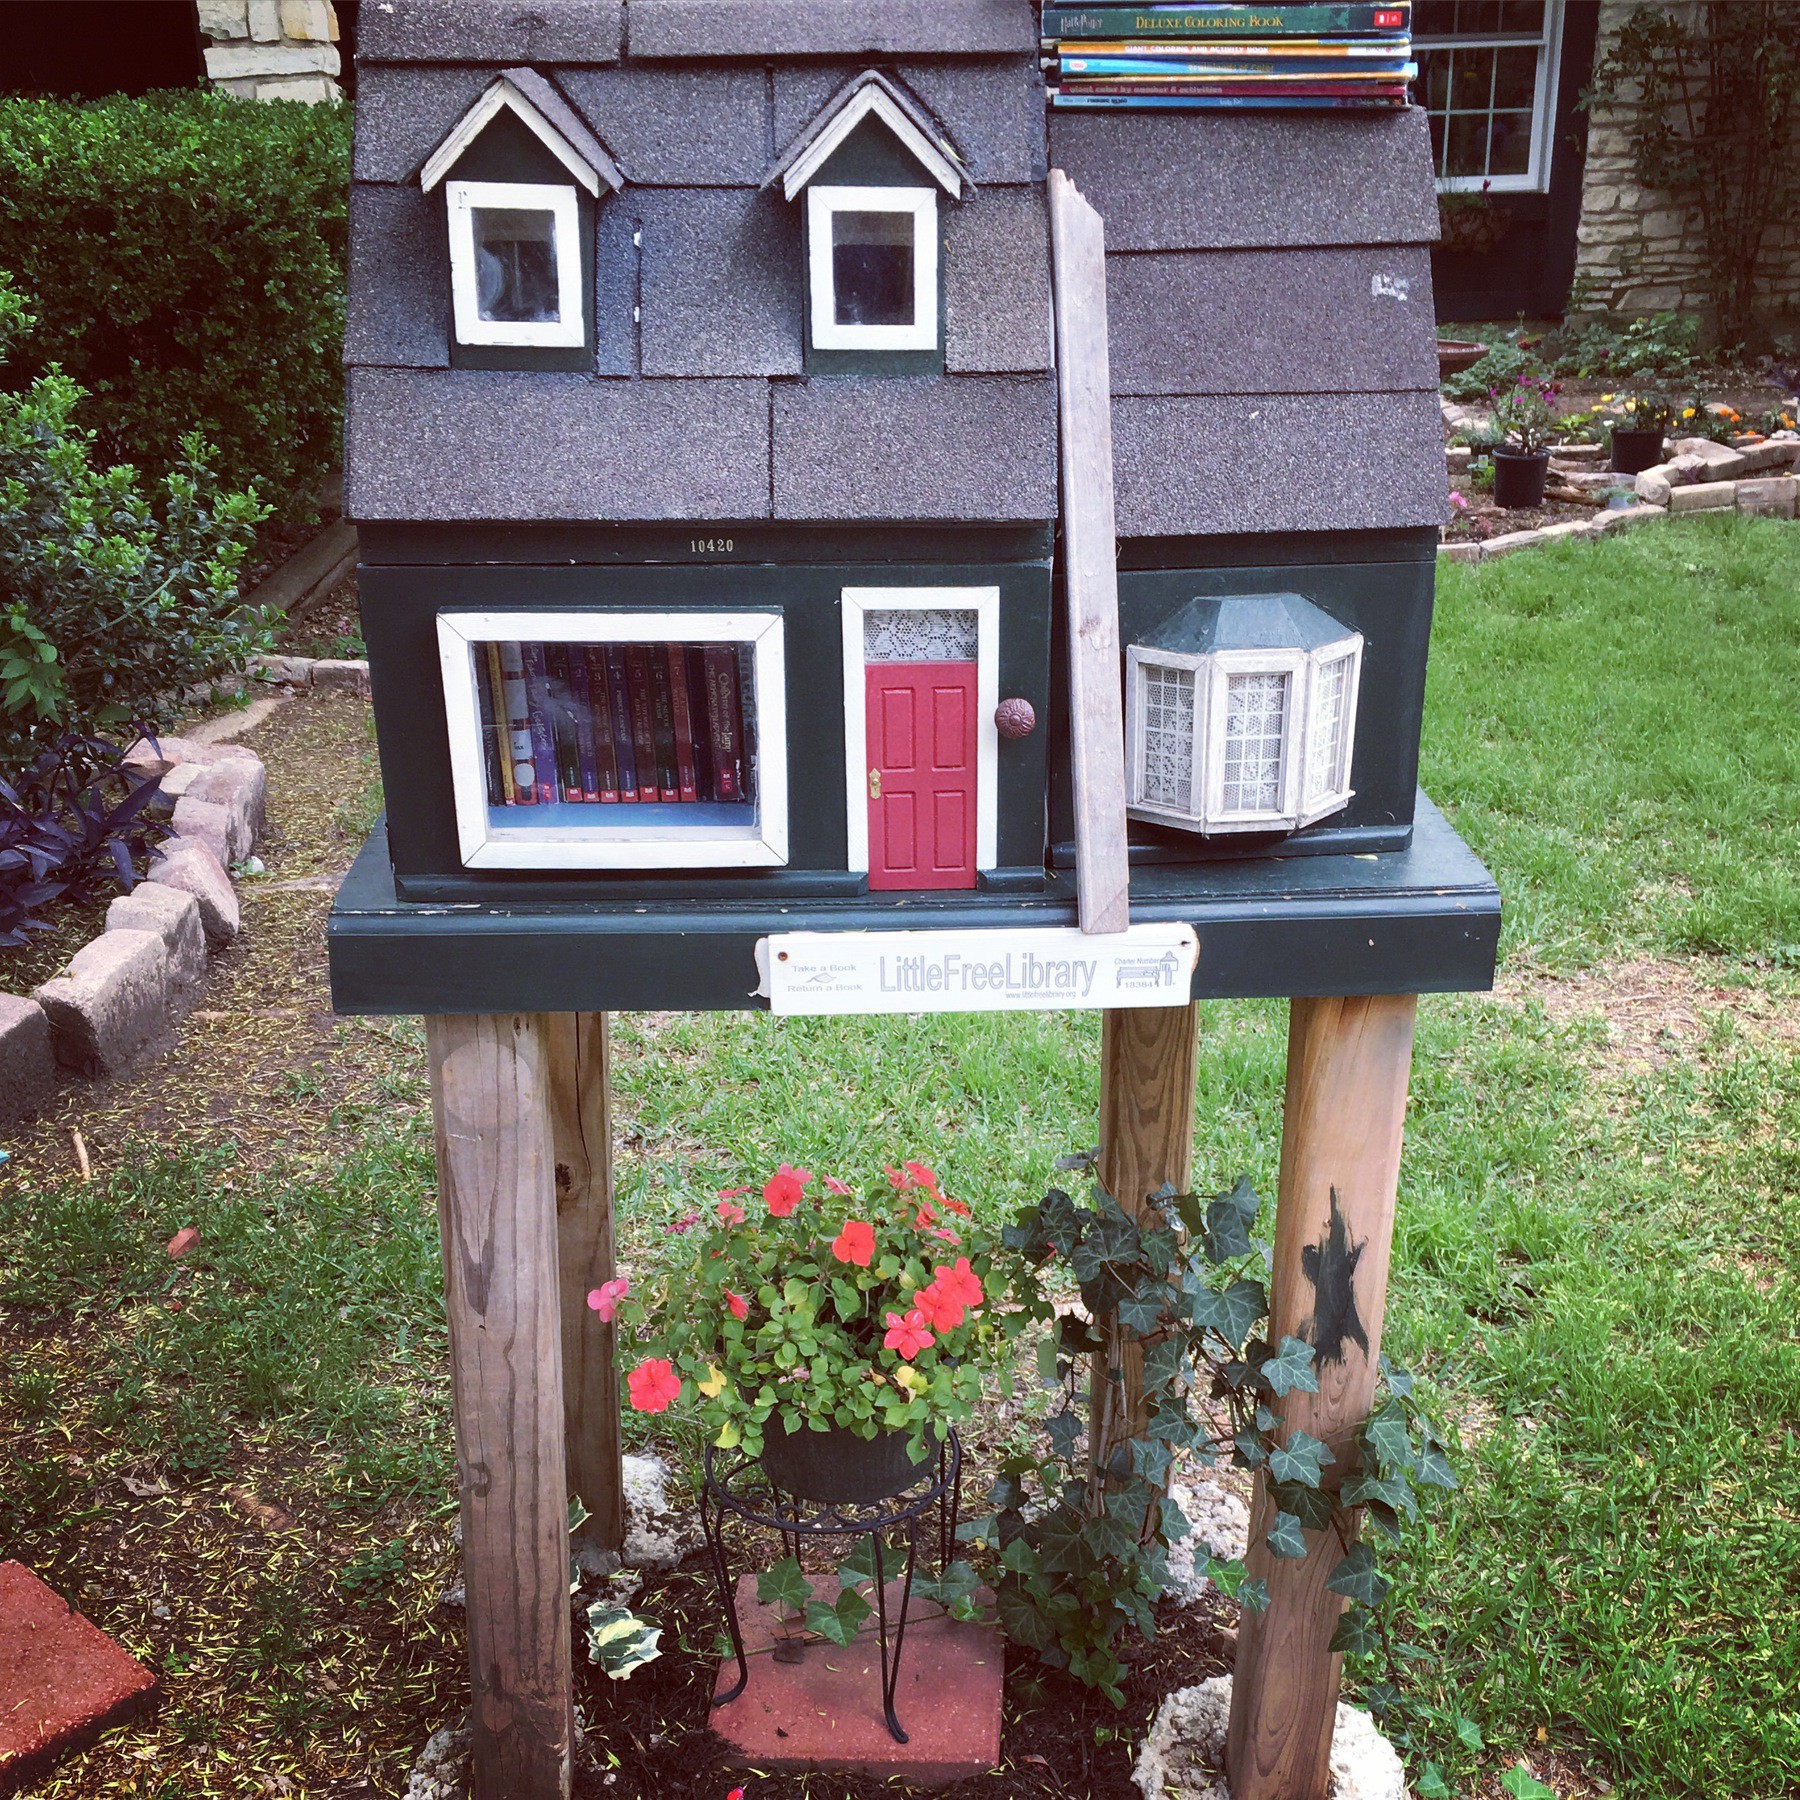 Doll house Little Free Library